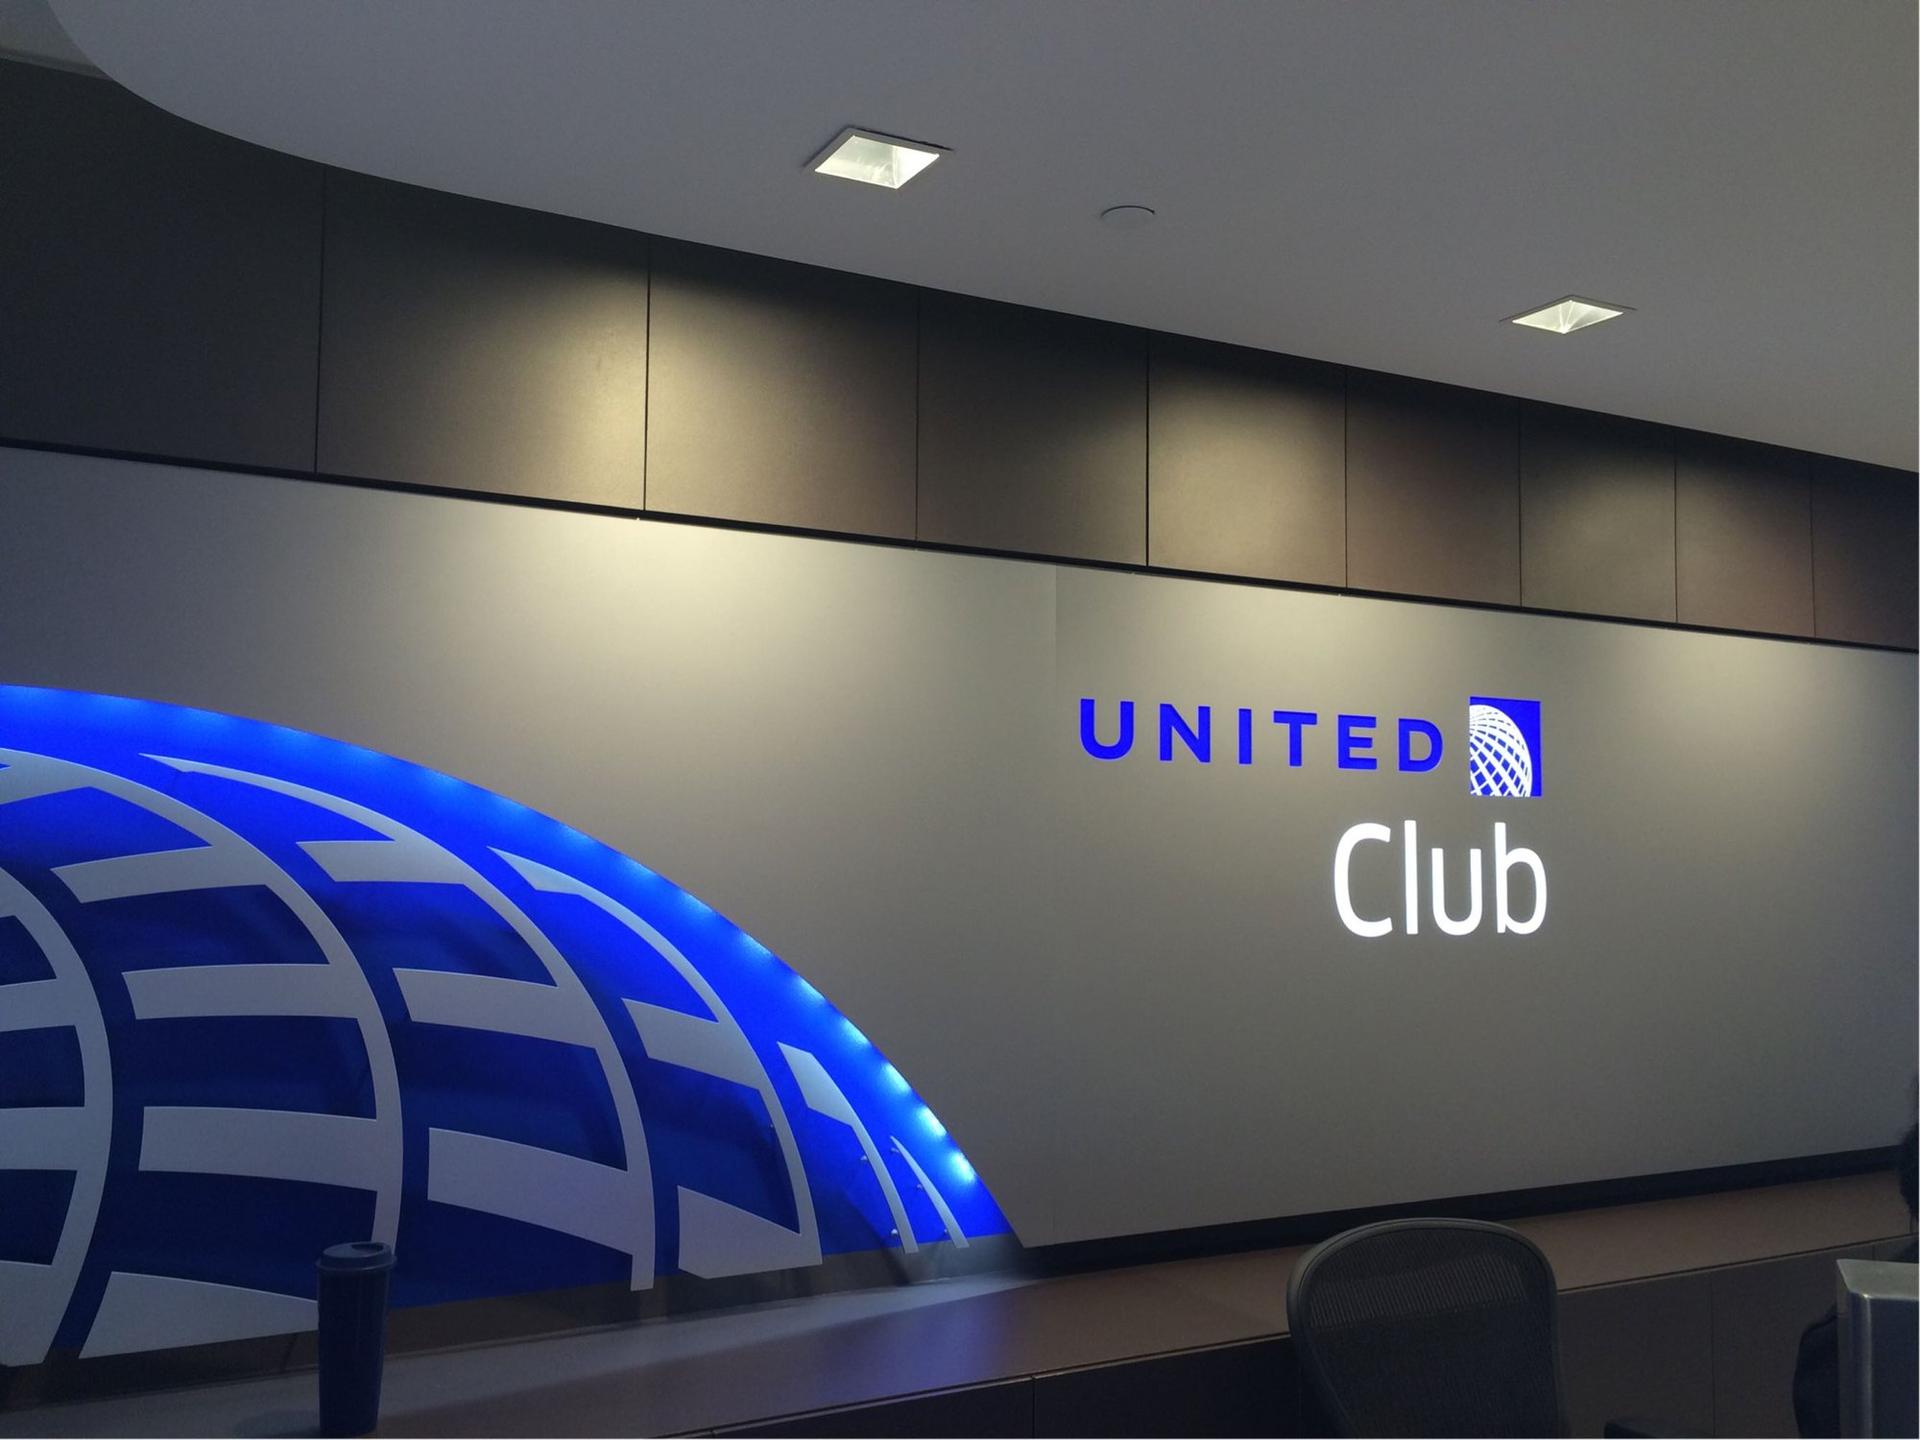 United Airlines United Club image 4 of 43